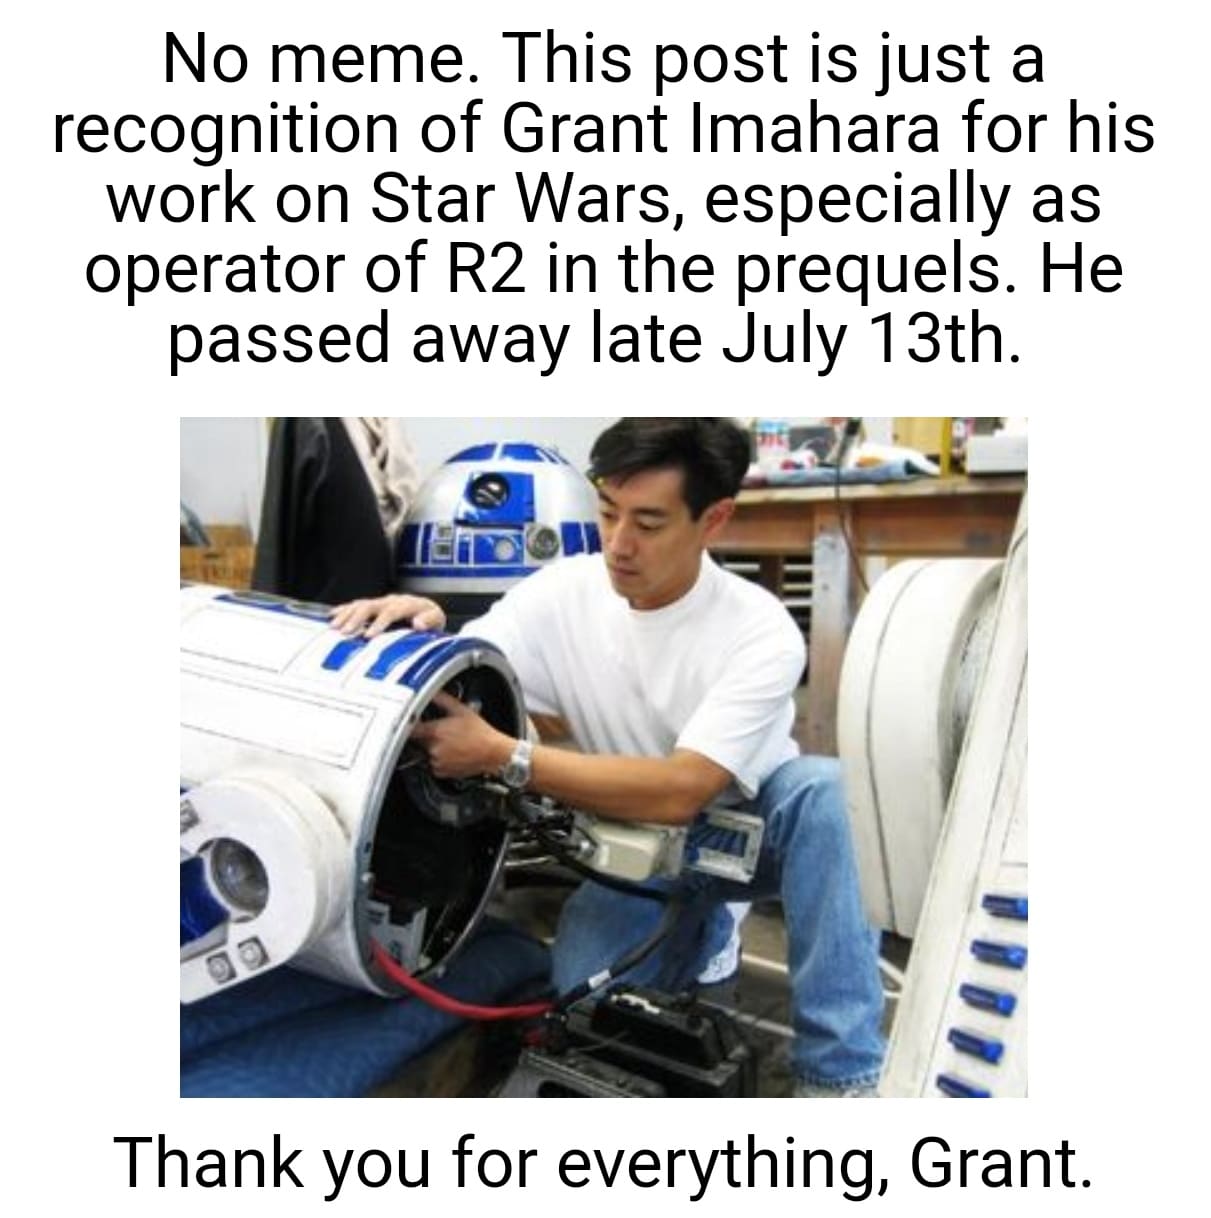 Prequel-memes, Grant, Star Wars, Force, RIP, Peace Star Wars Memes Prequel-memes, Grant, Star Wars, Force, RIP, Peace text: No meme. This post is just a recognition of Grant Imahara for his work on Star Wars, especially as operator of R2 in the prequels. He passed away late July 13th. Thank you for everything, Grant. 